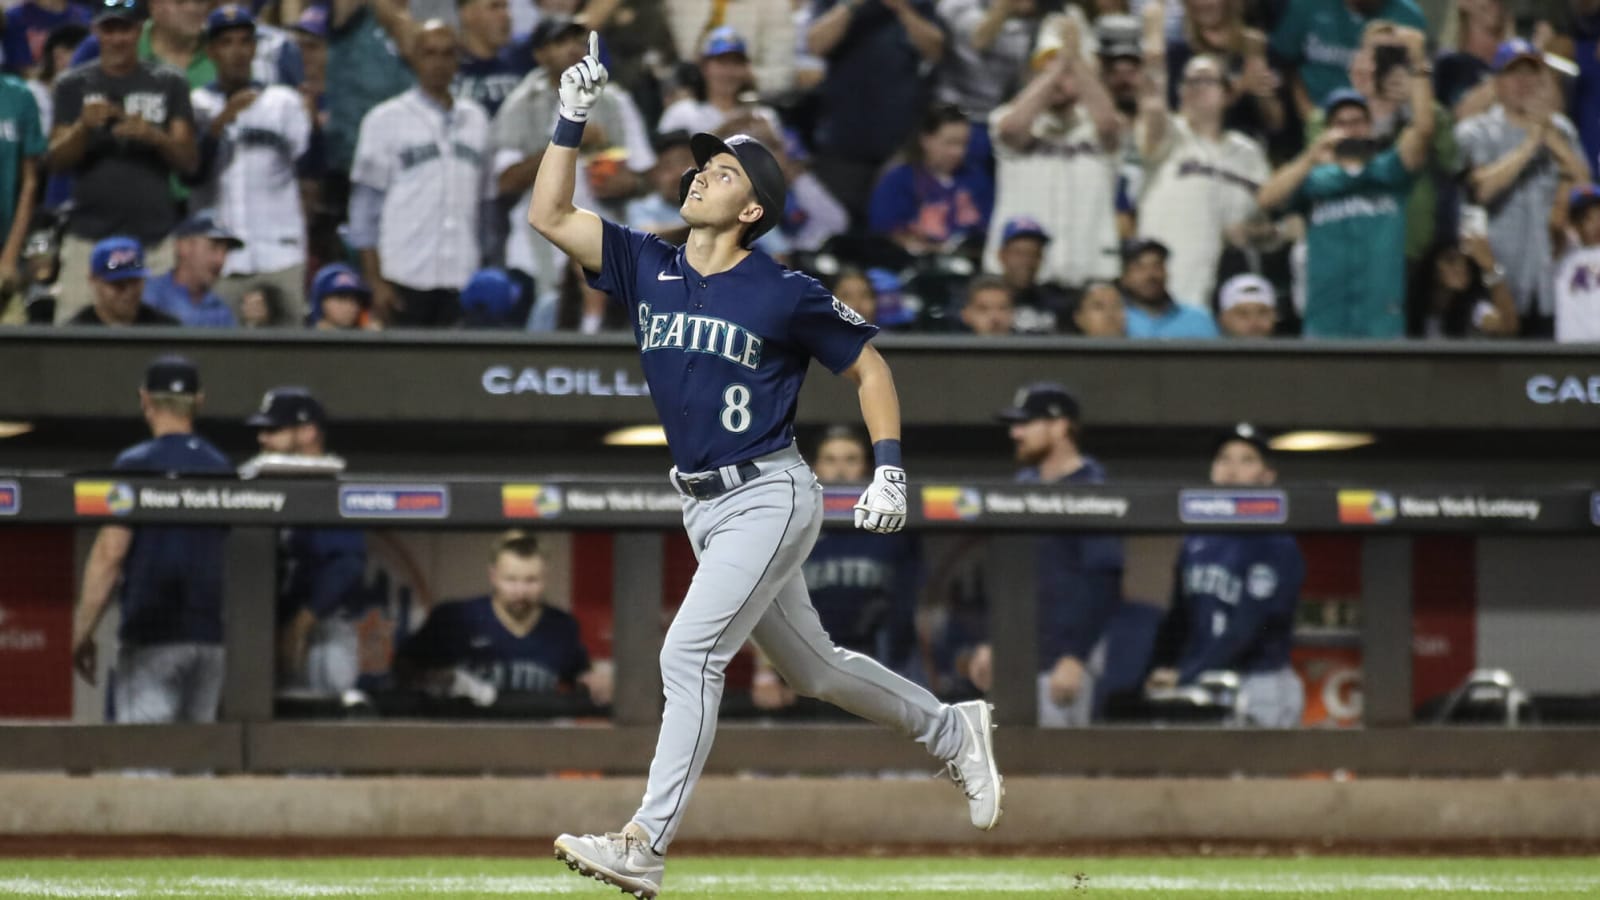 The Paul Sewald Trade Is Paying Dividends For The Mariners